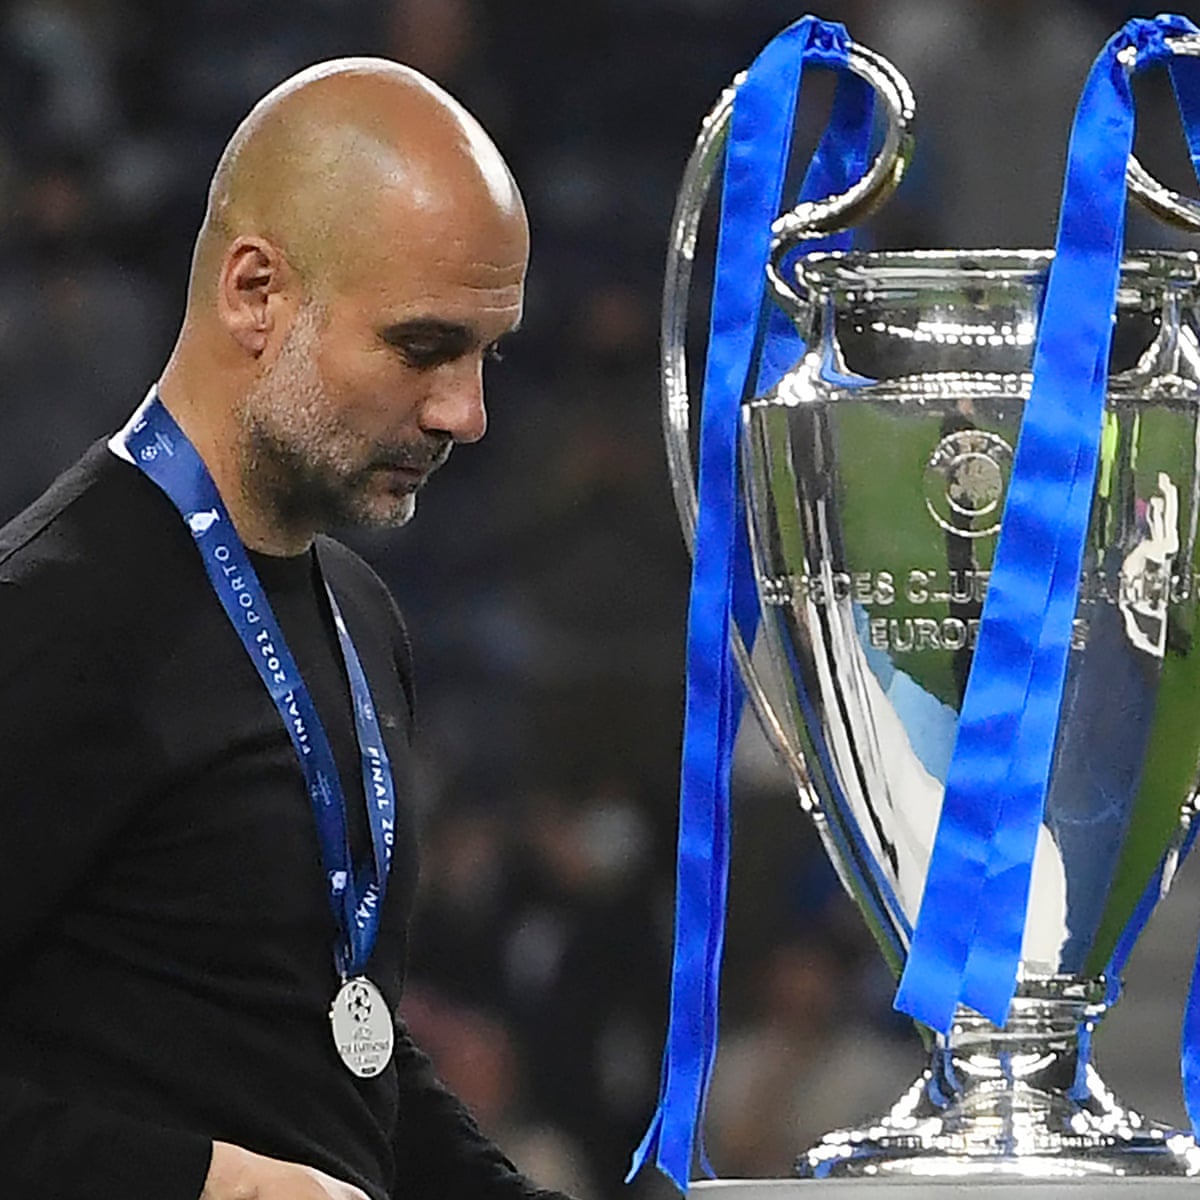 Pep Guardiola has reached his ninth Champions League semi-final, the most of any manager in the history of the competition